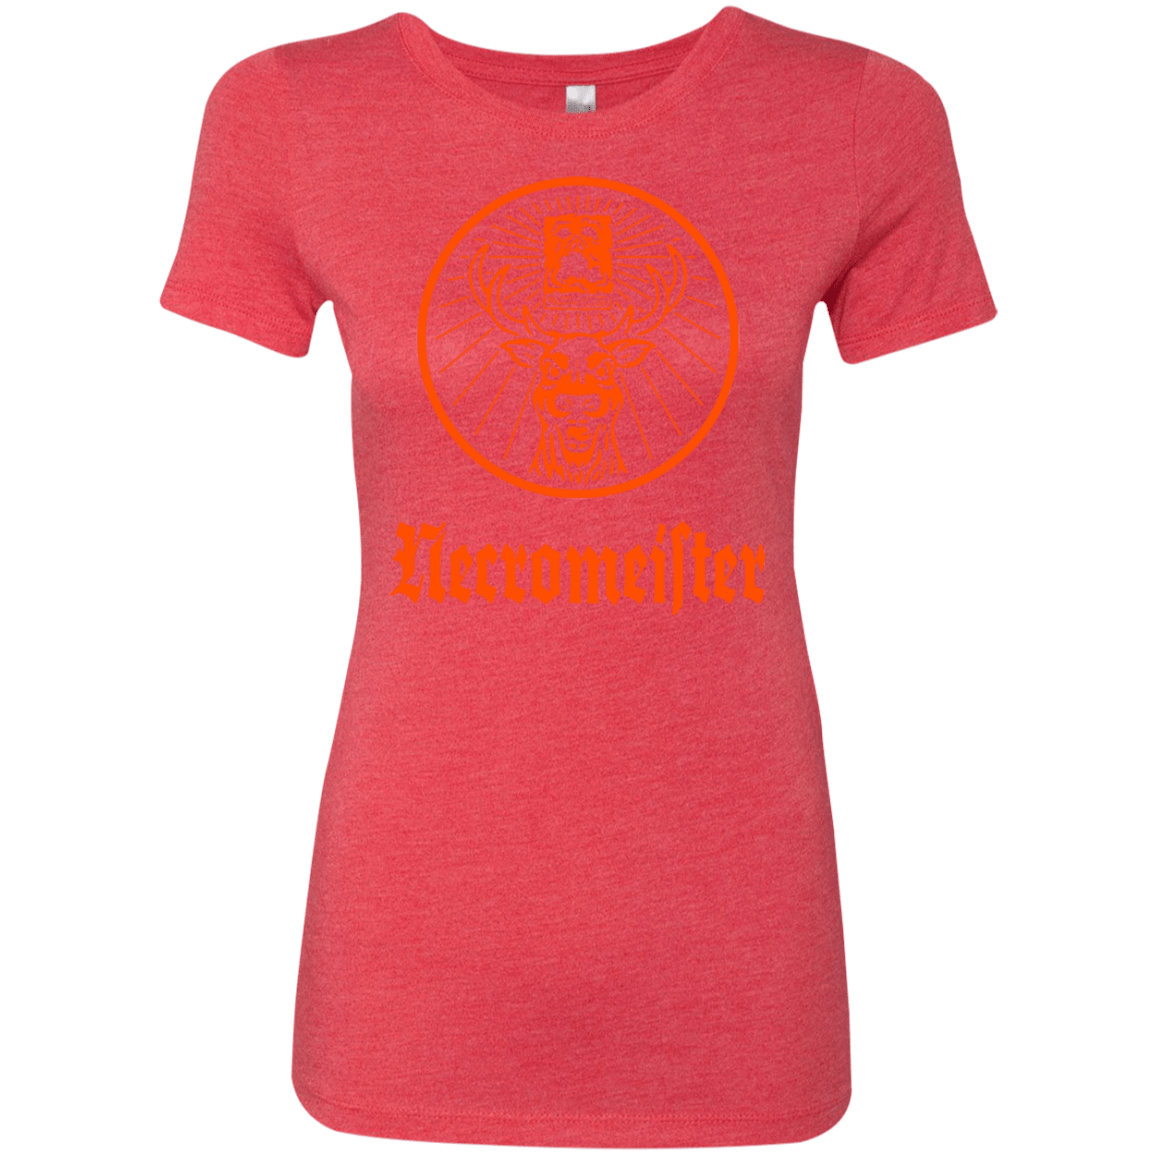 T-Shirts Vintage Red / Small NECROMEISTER Women's Triblend T-Shirt